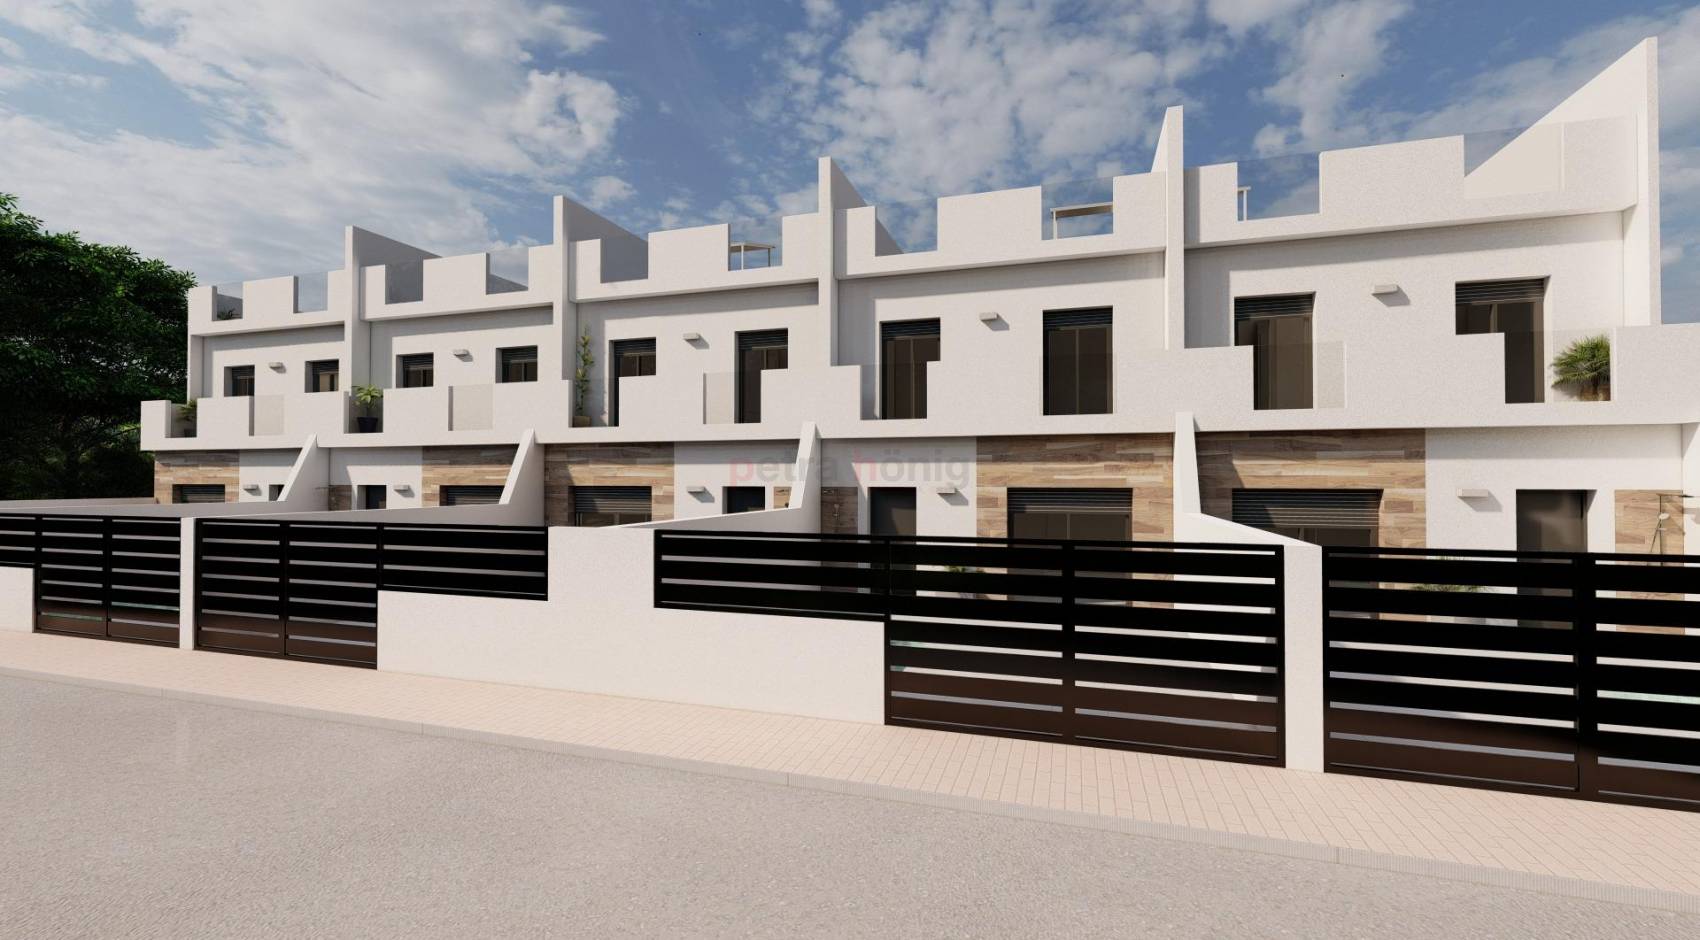 New build - Townhouse - Other areas - Euro Roda